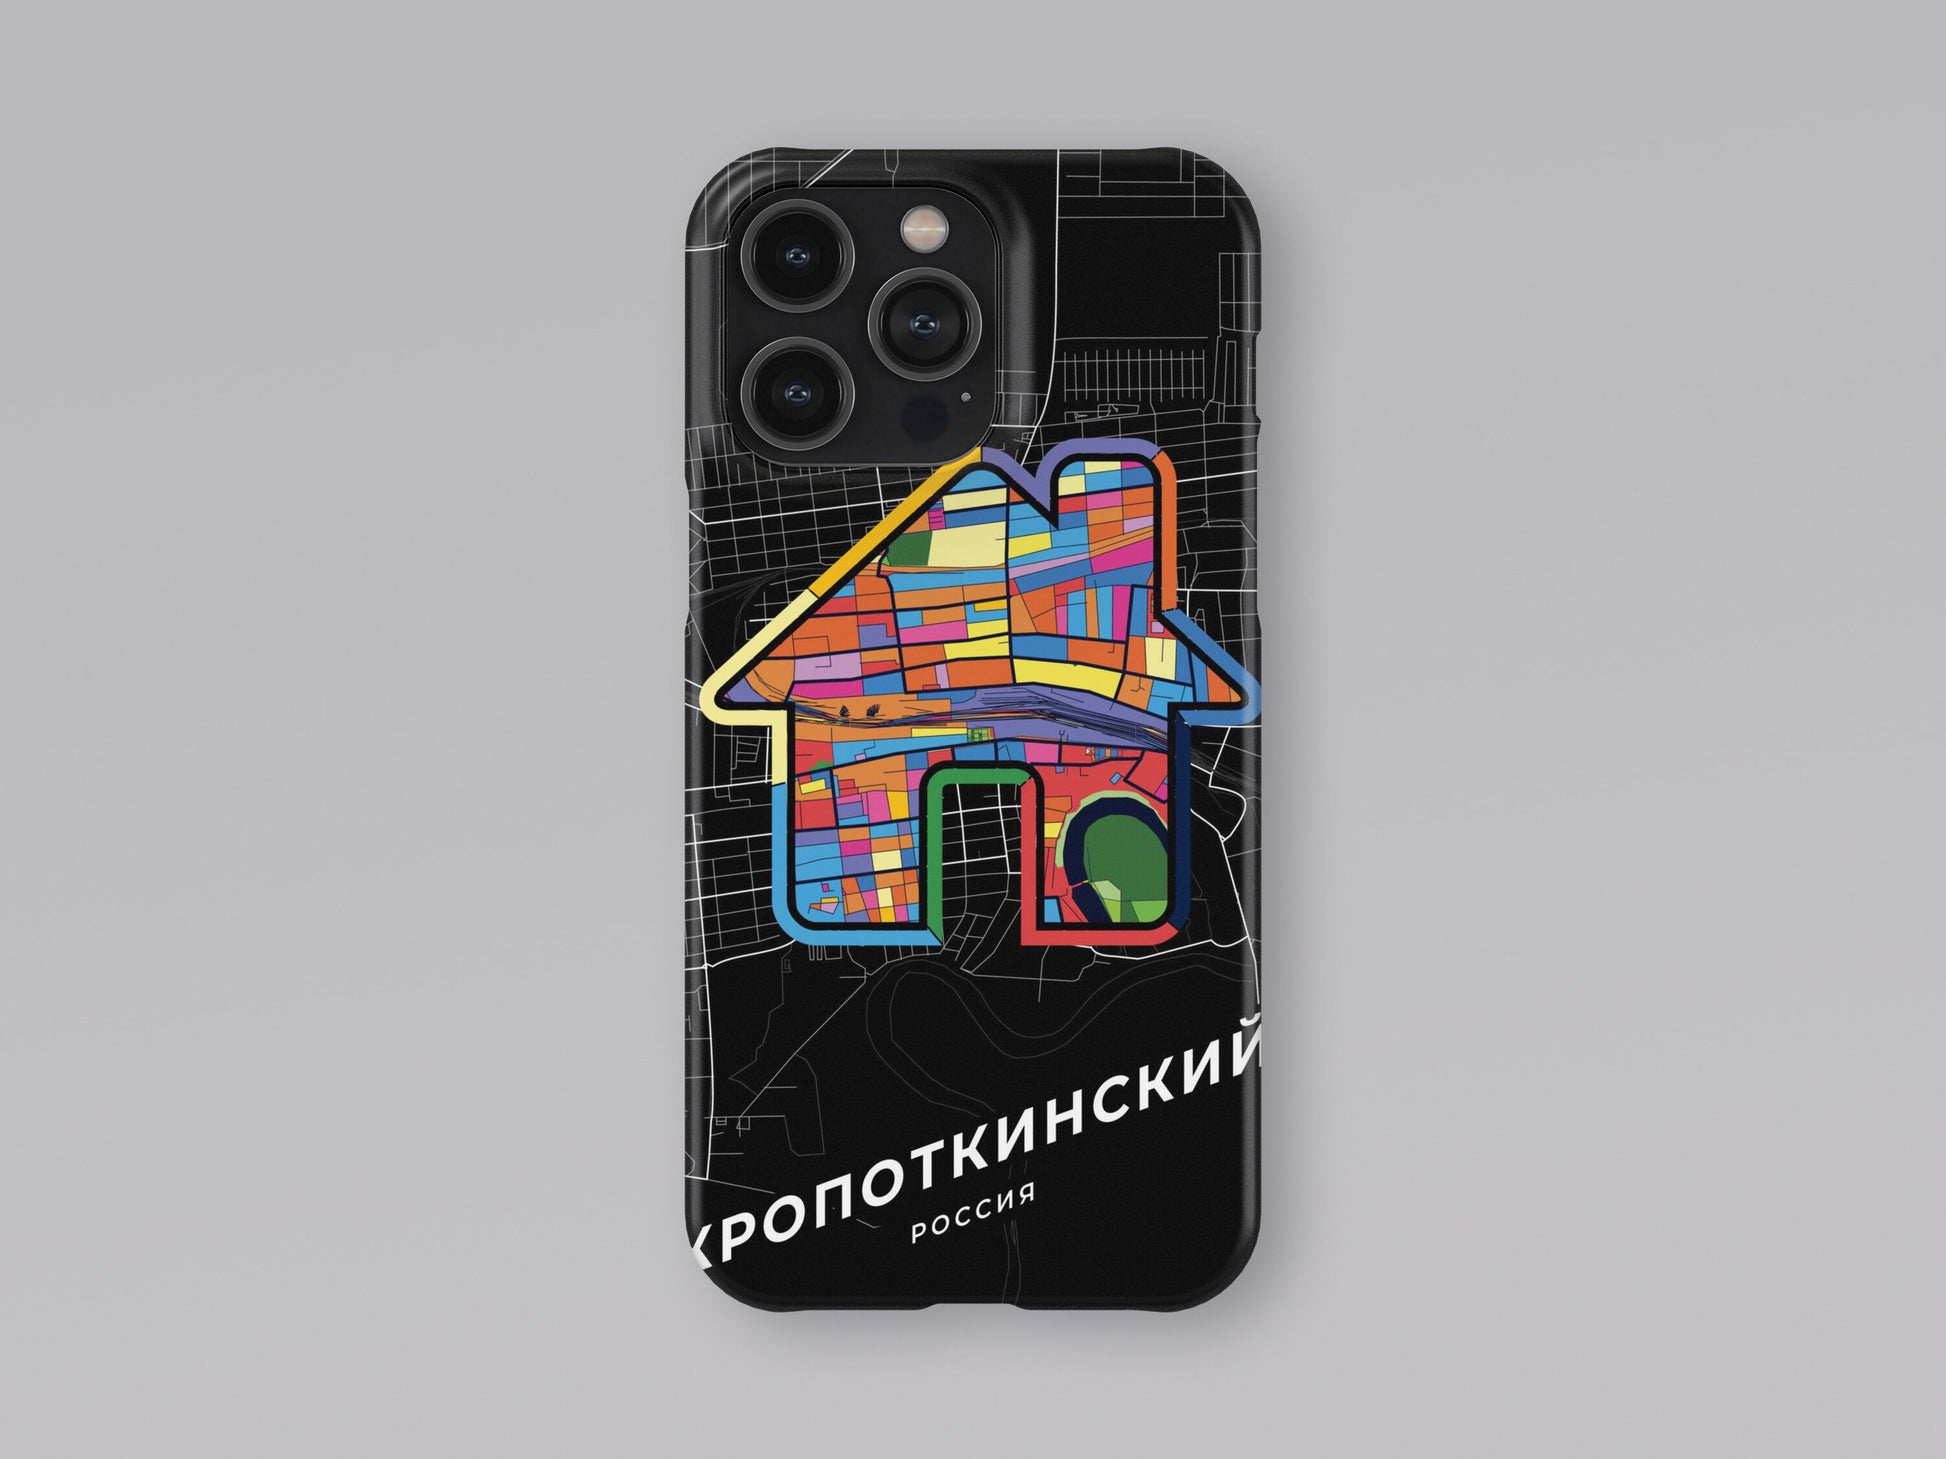 Kropotkin Russia slim phone case with colorful icon. Birthday, wedding or housewarming gift. Couple match cases. 3